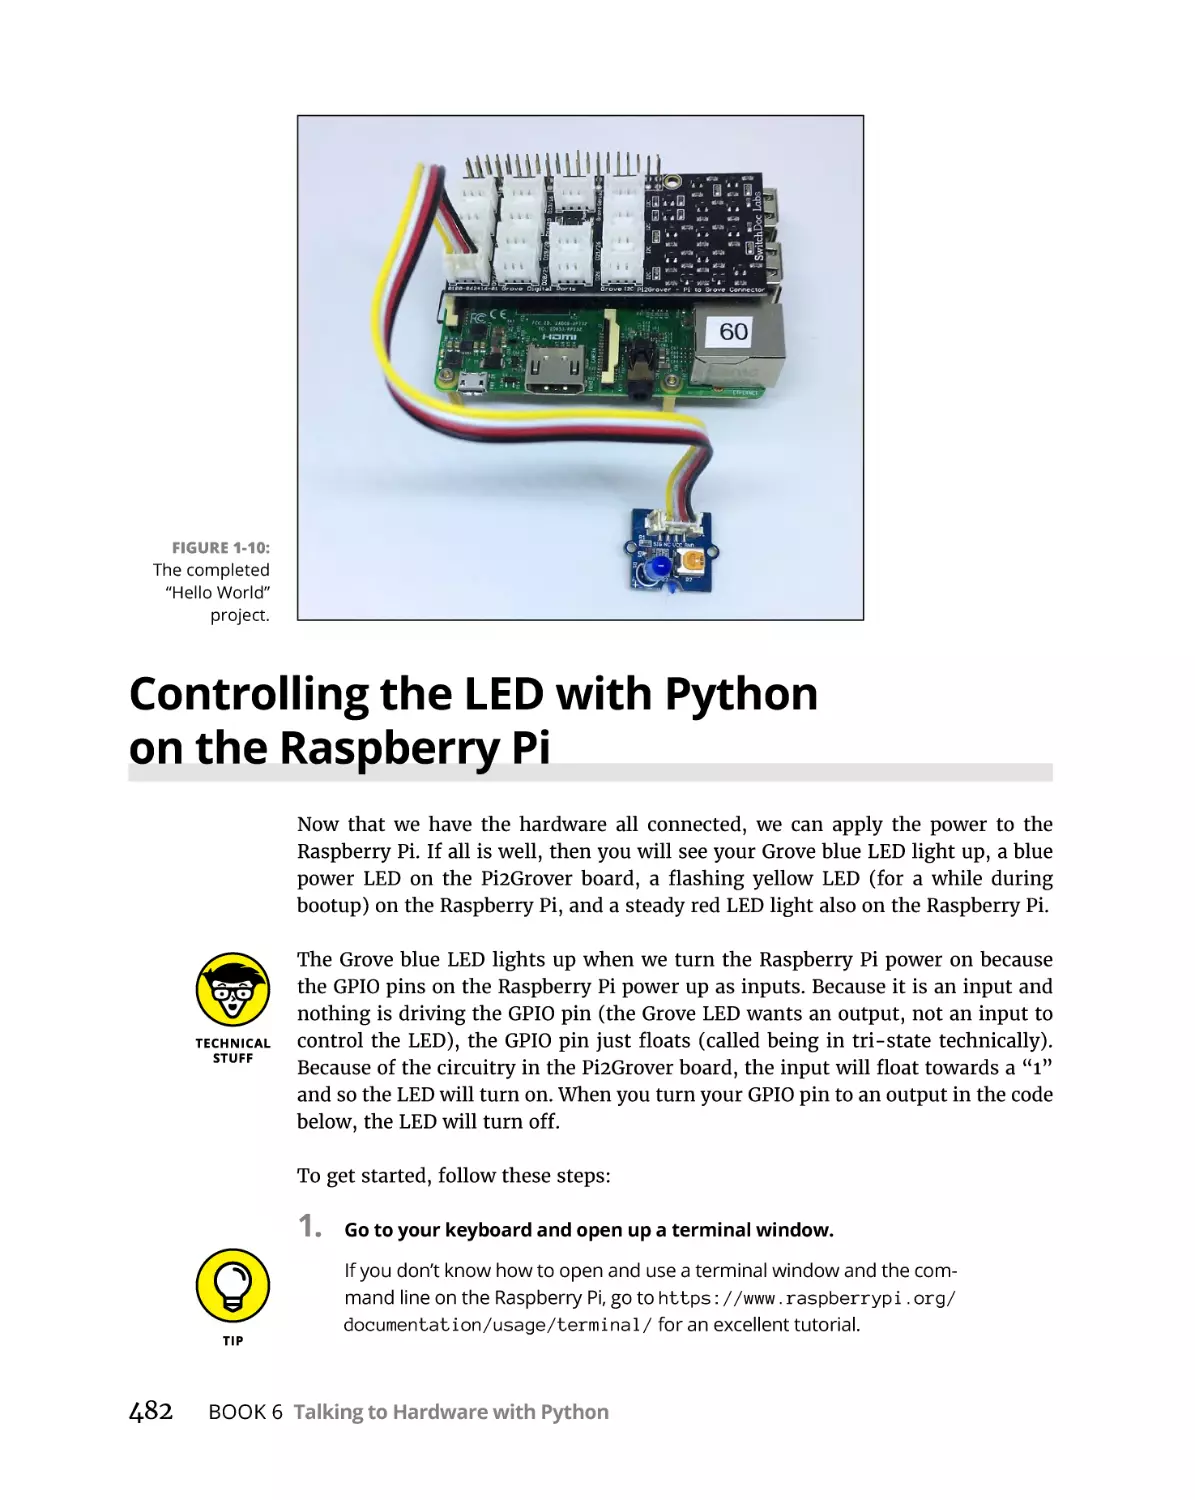 Controlling the LED with Python on the Raspberry Pi